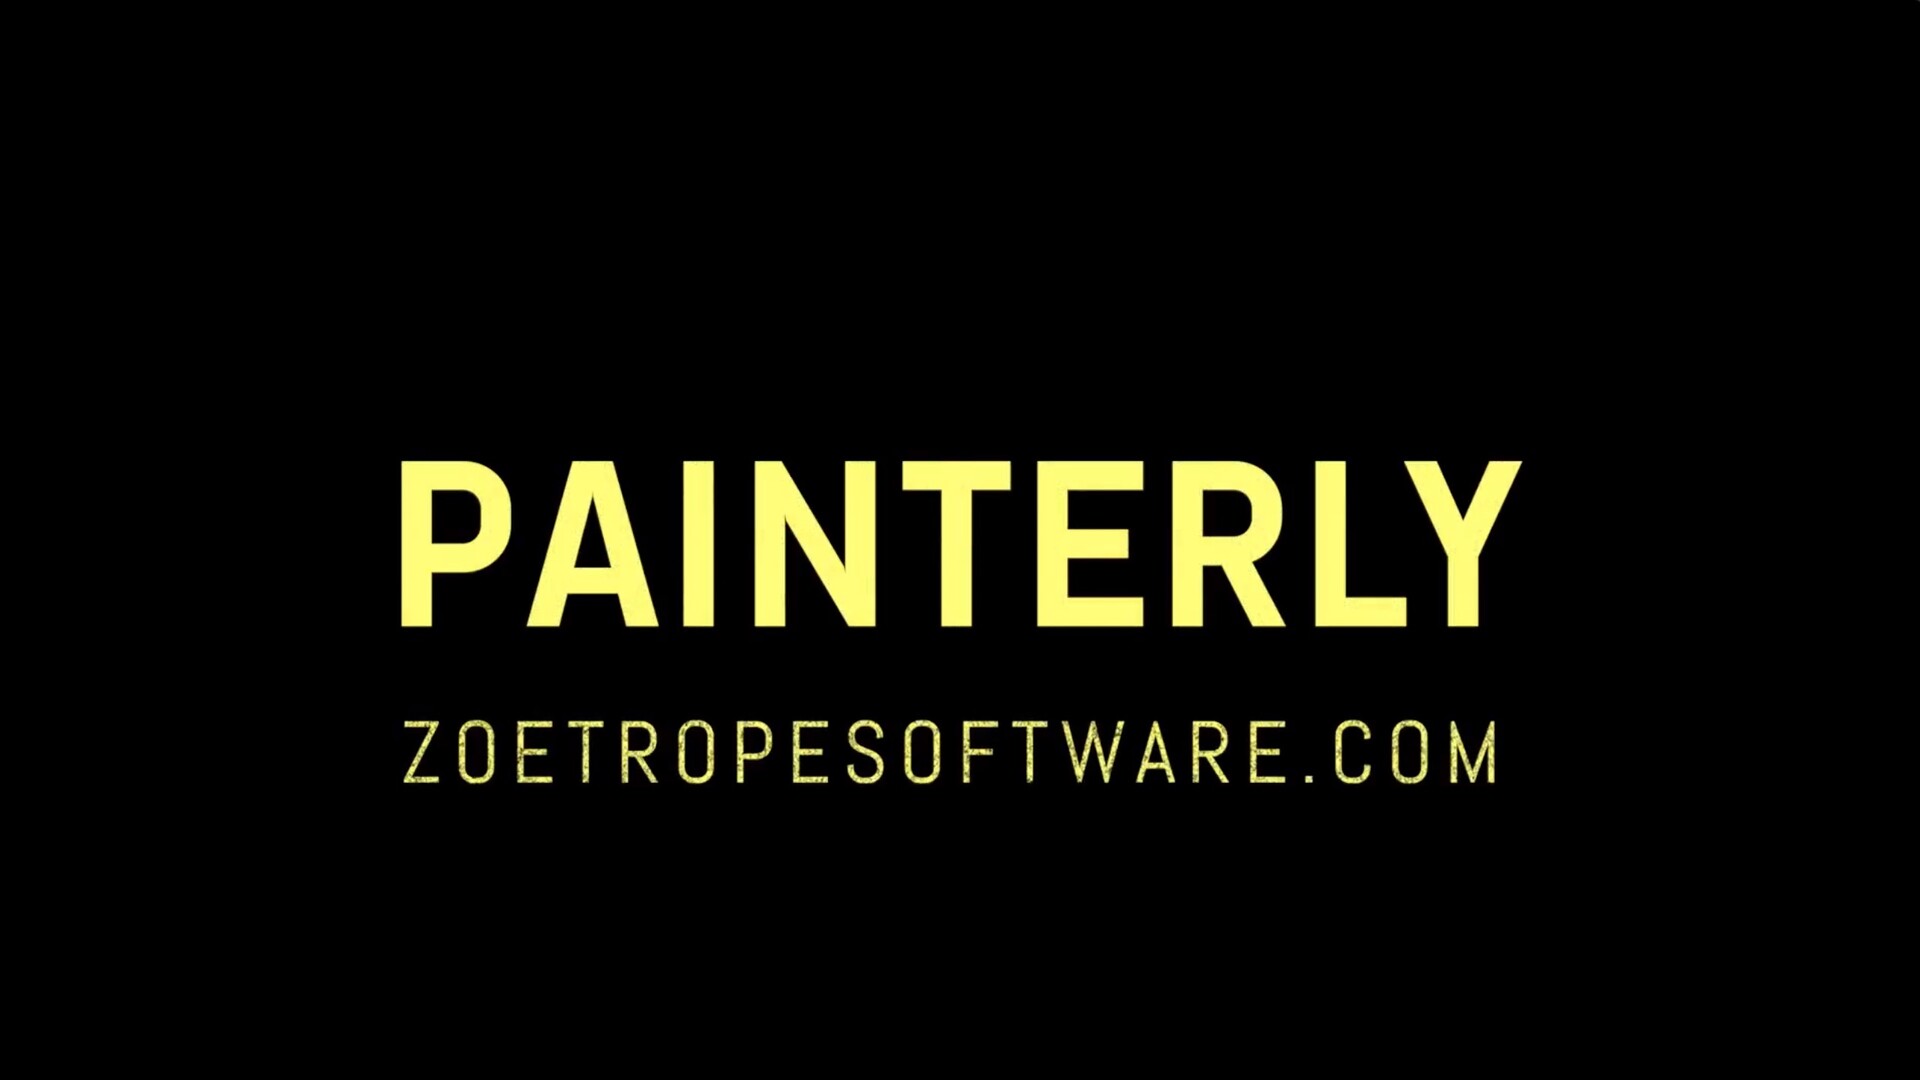 fcpx插件：绘画转场 Zoetrope Painterly Transitions